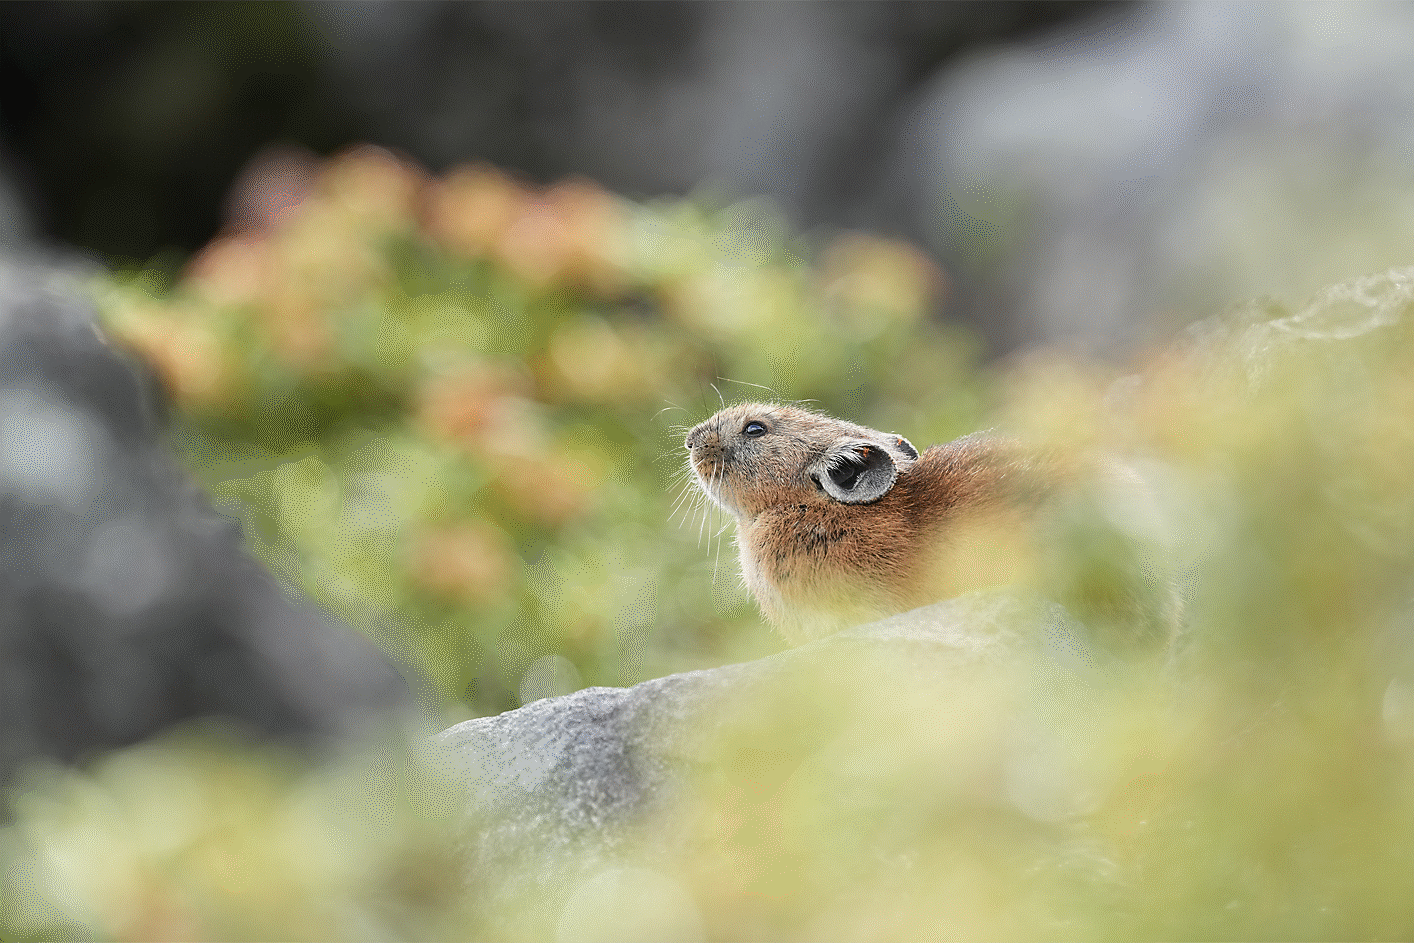 Image of a rabbit in focus